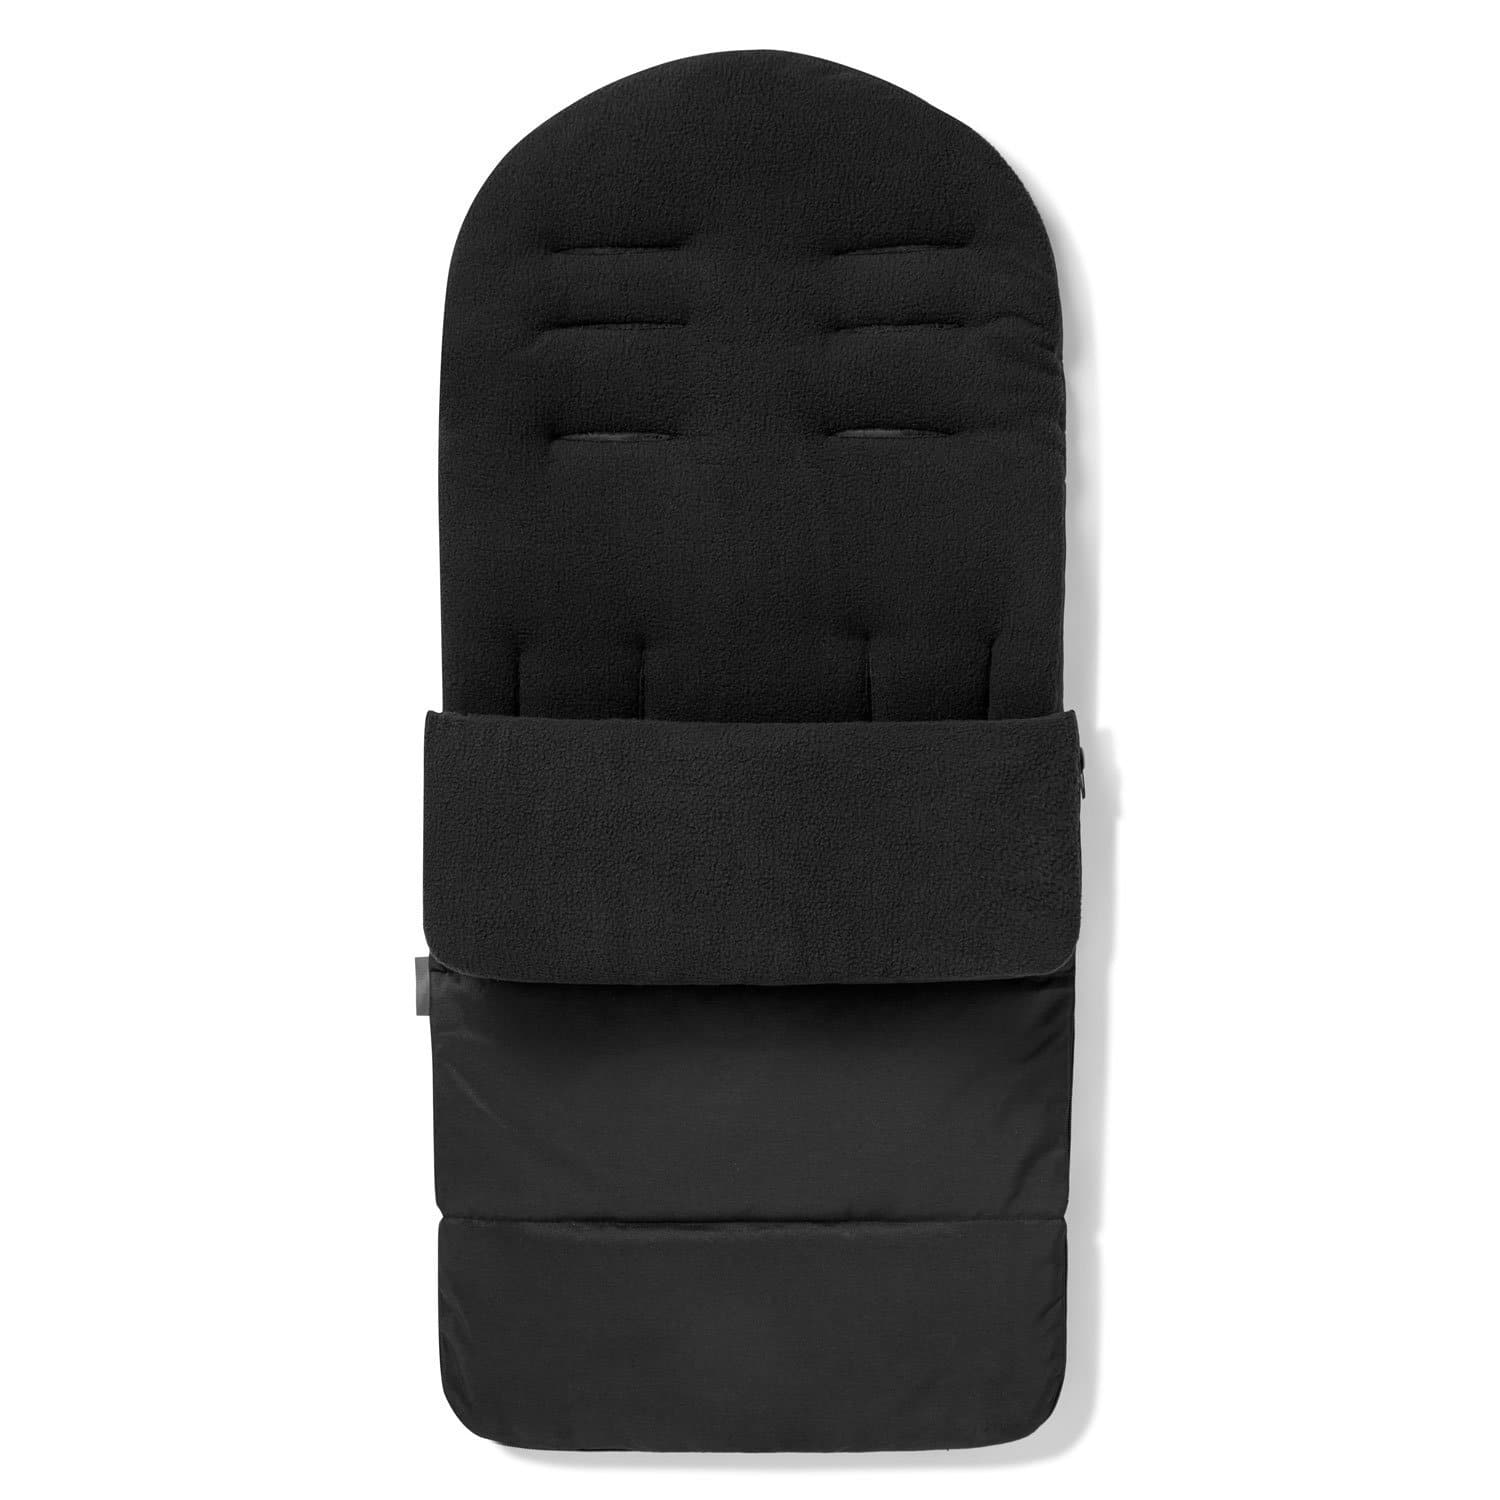 Premium Footmuff / Cosy Toes Compatible with Red Kite - Black Jack / Fits All Models | For Your Little One